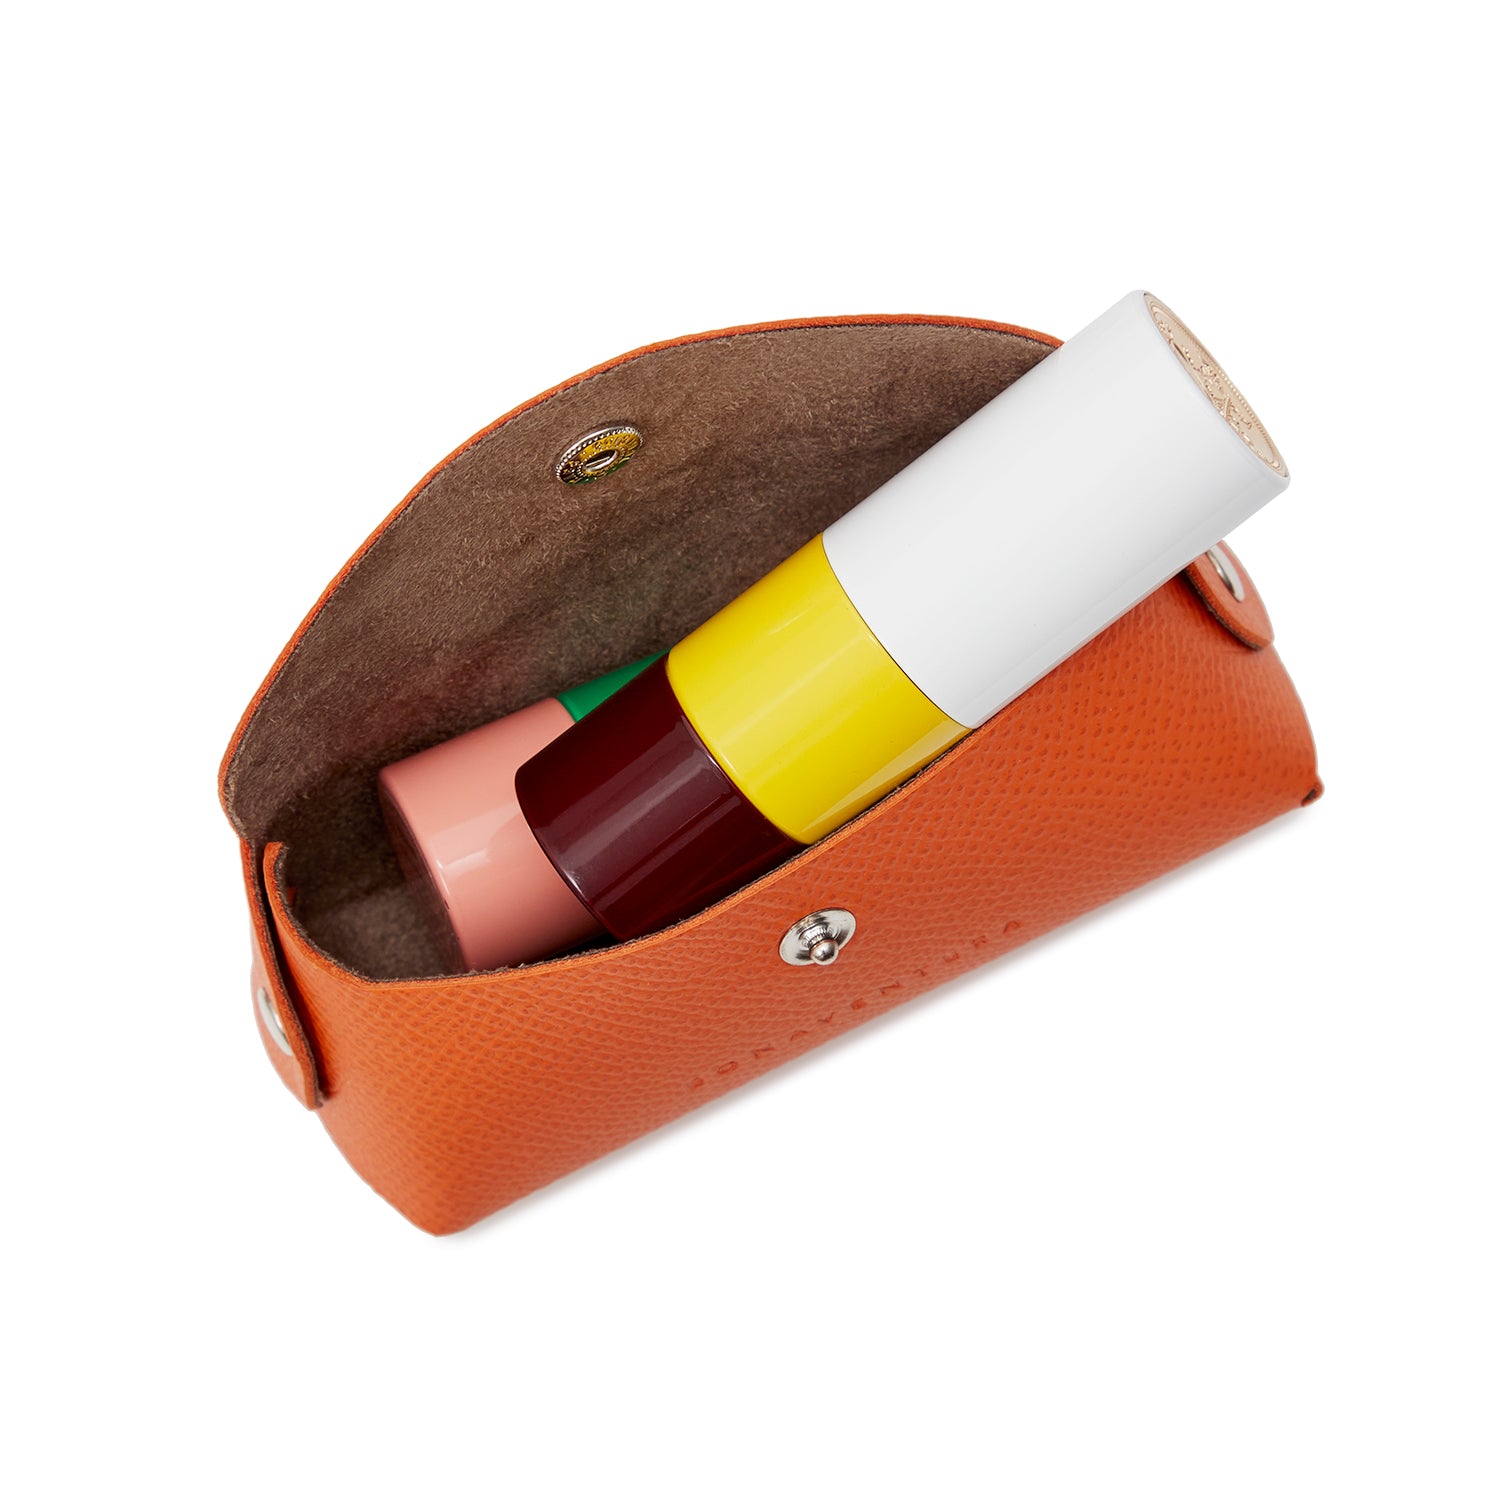 Lipstick case in Noblesse leather